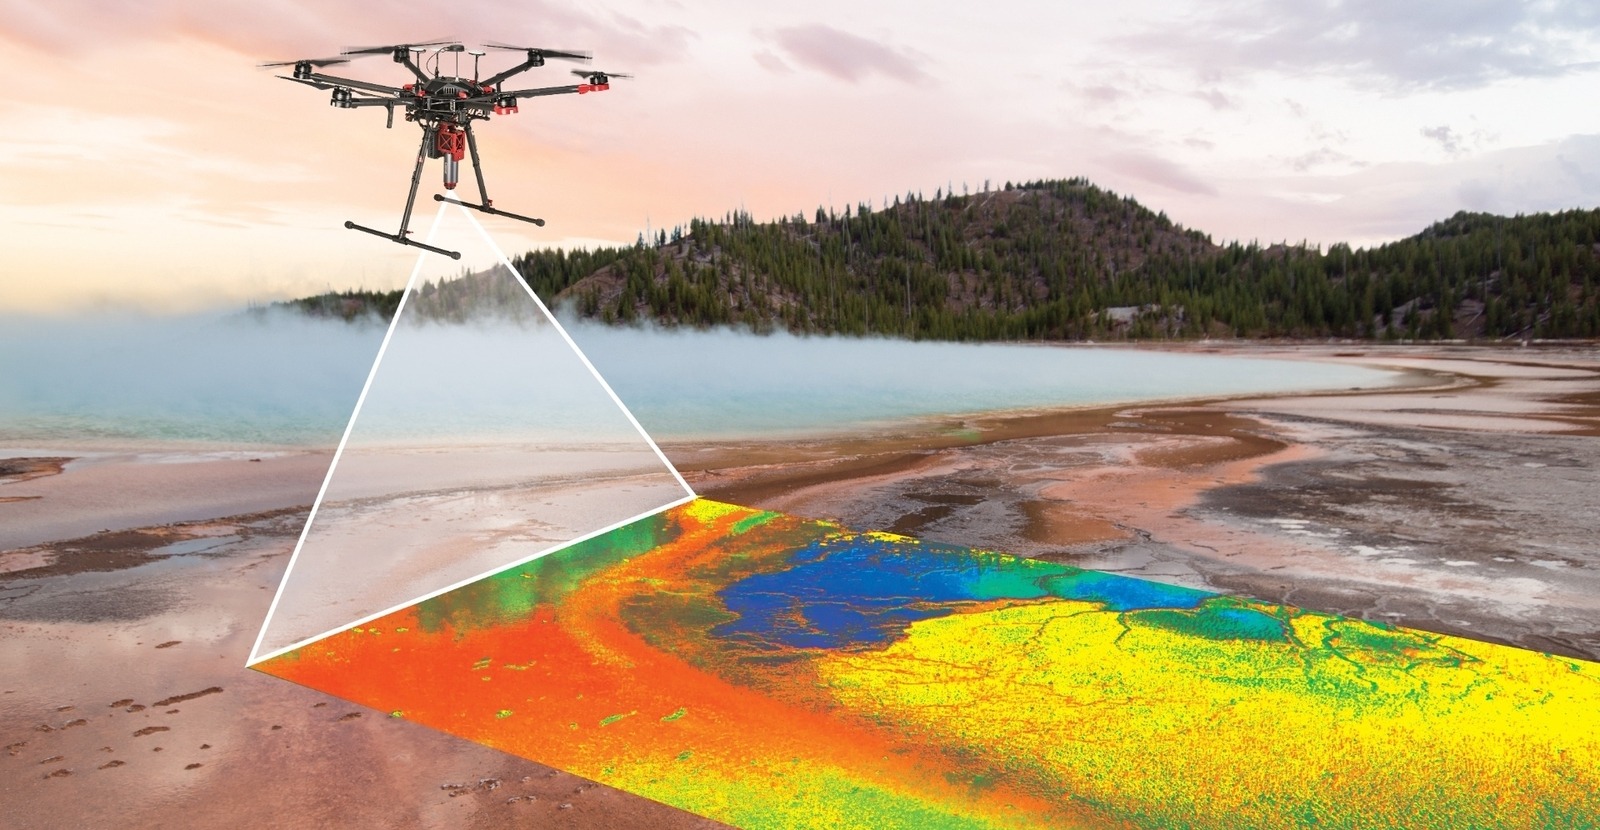 Resonon Airborne Hyperspectral Remote Sensing System scanning tidal pools with false-color overlay